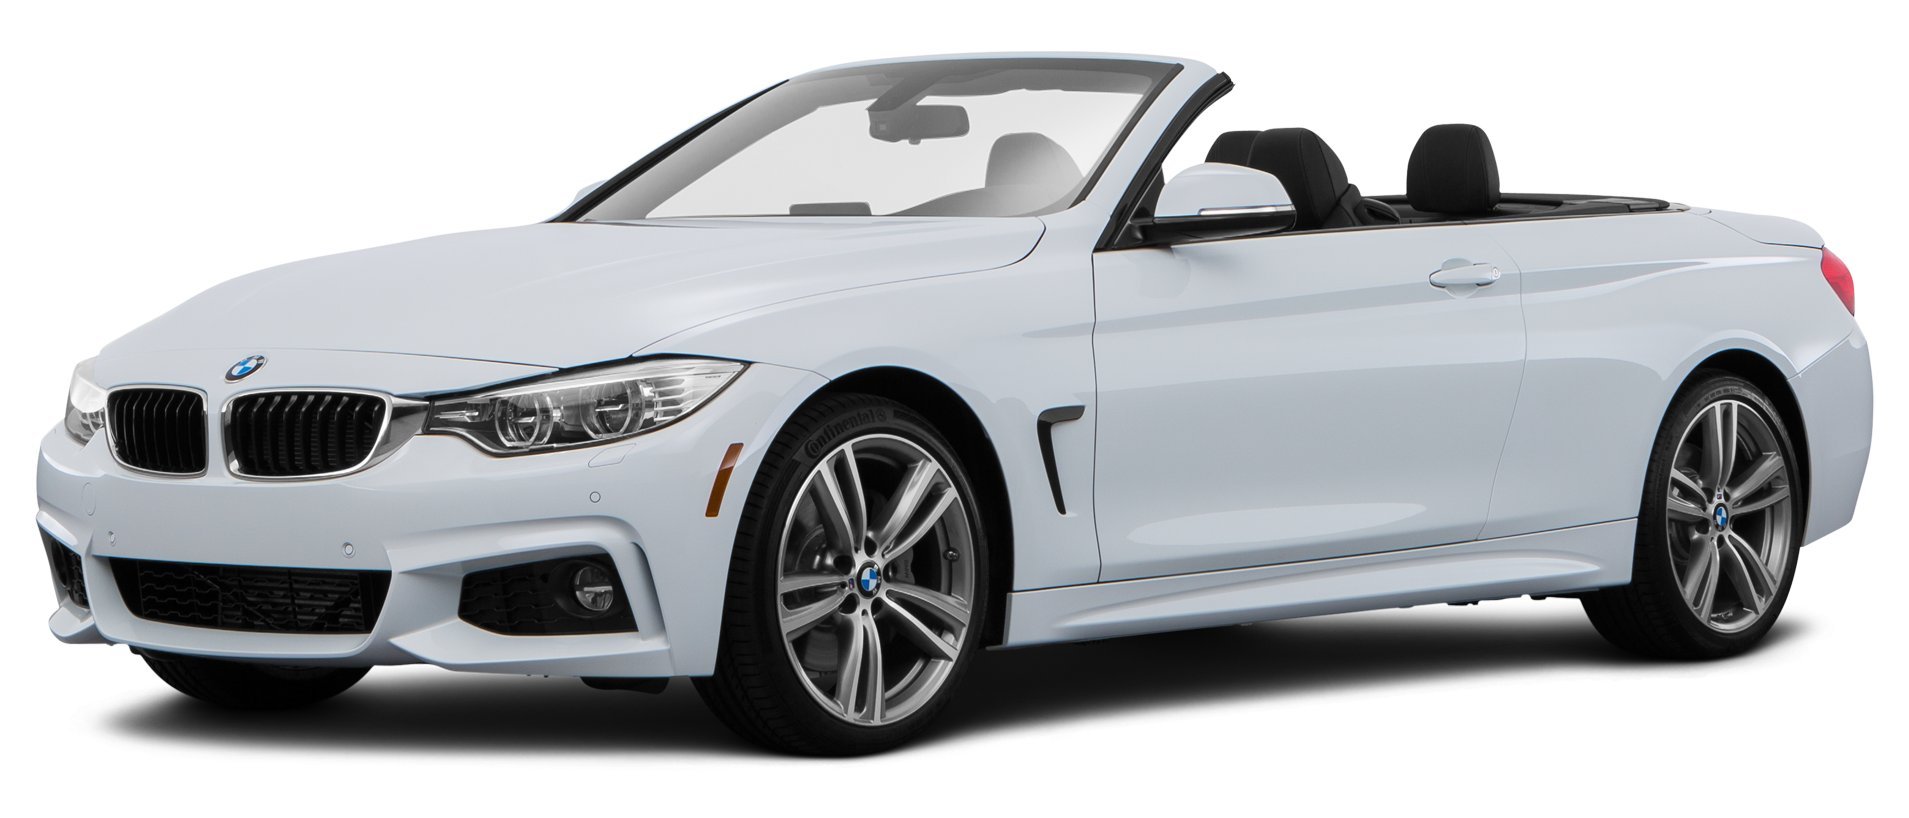  BMW 435I oem parts and accessories on sale